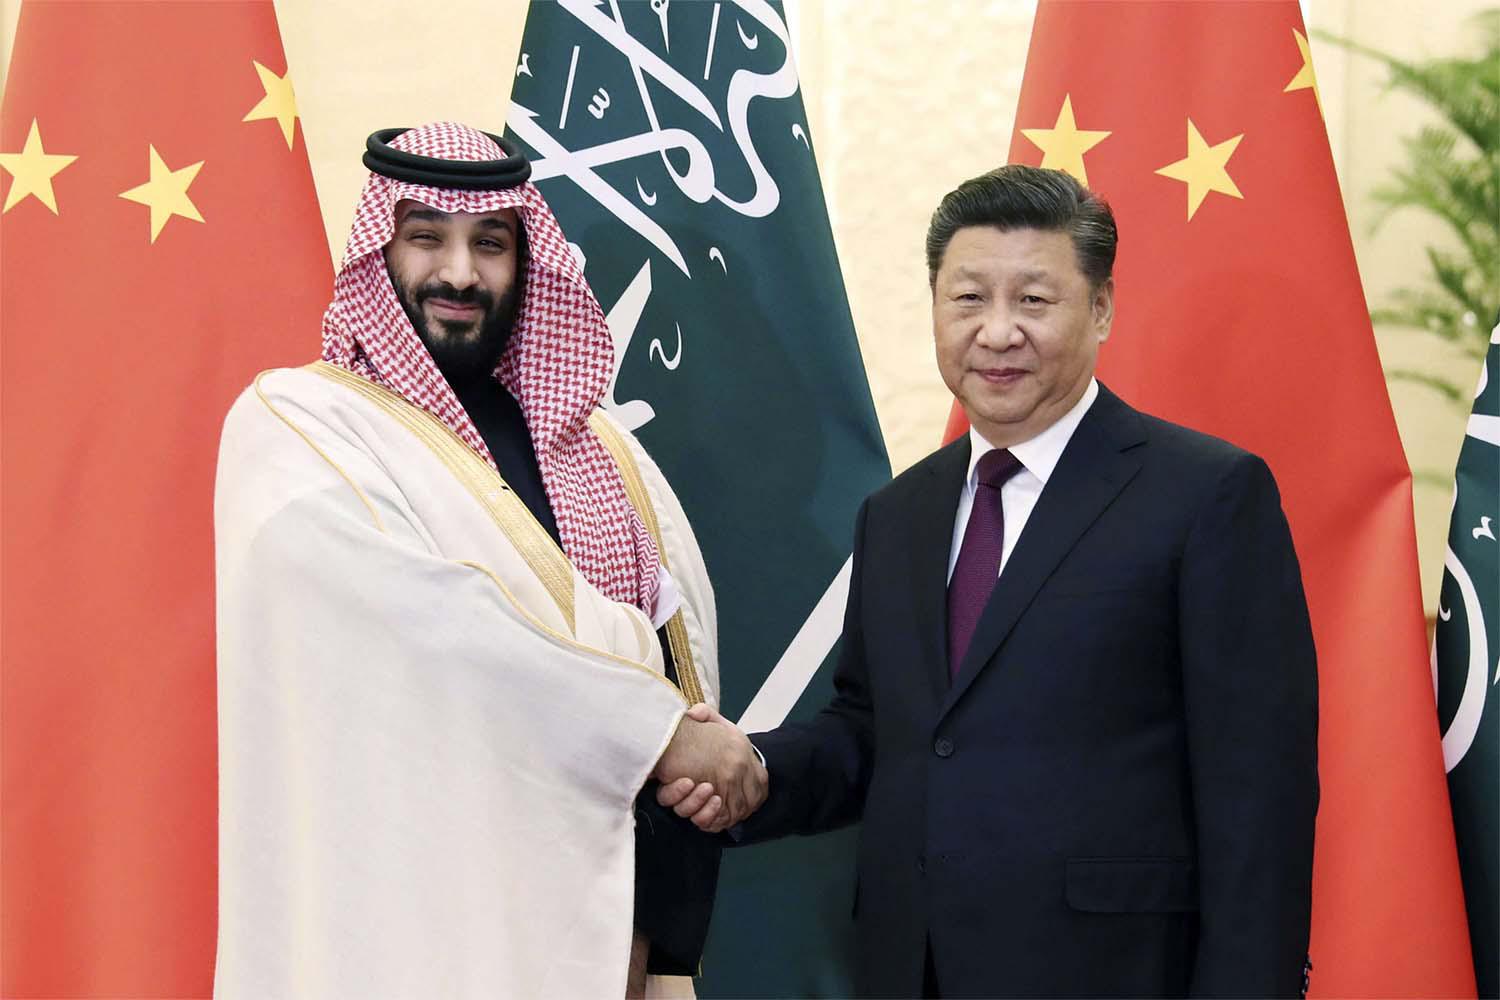 Invitations have gone out to leaders in the Middle East and North Africa for the Chinese-Arab gathering